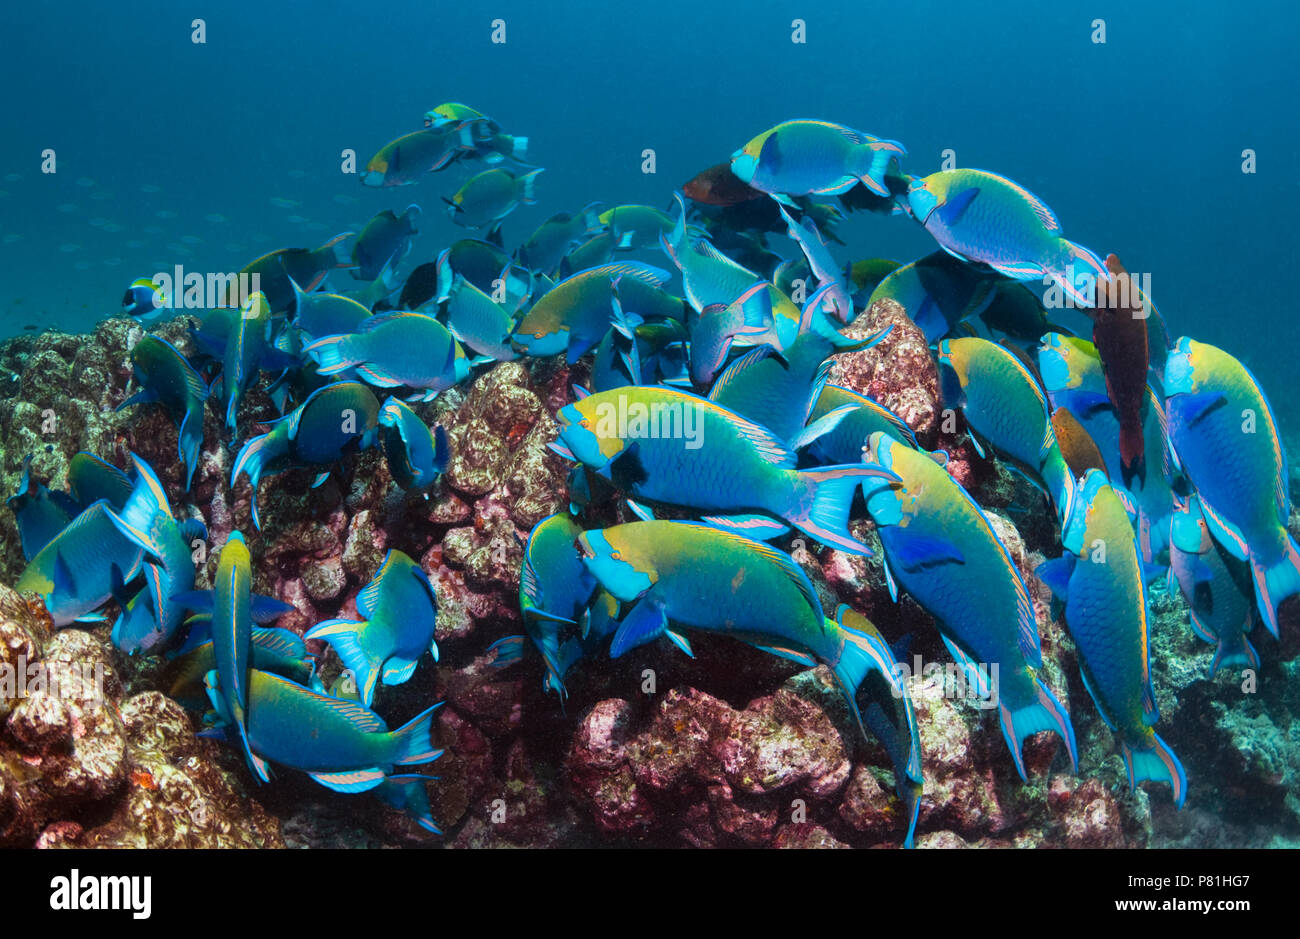 Greenthroat or Singapore parrotfish (Scarus prasiognathus), large school of terminal males grazing on algae covered coral rock.  Andaman Sea, Thailand Stock Photo